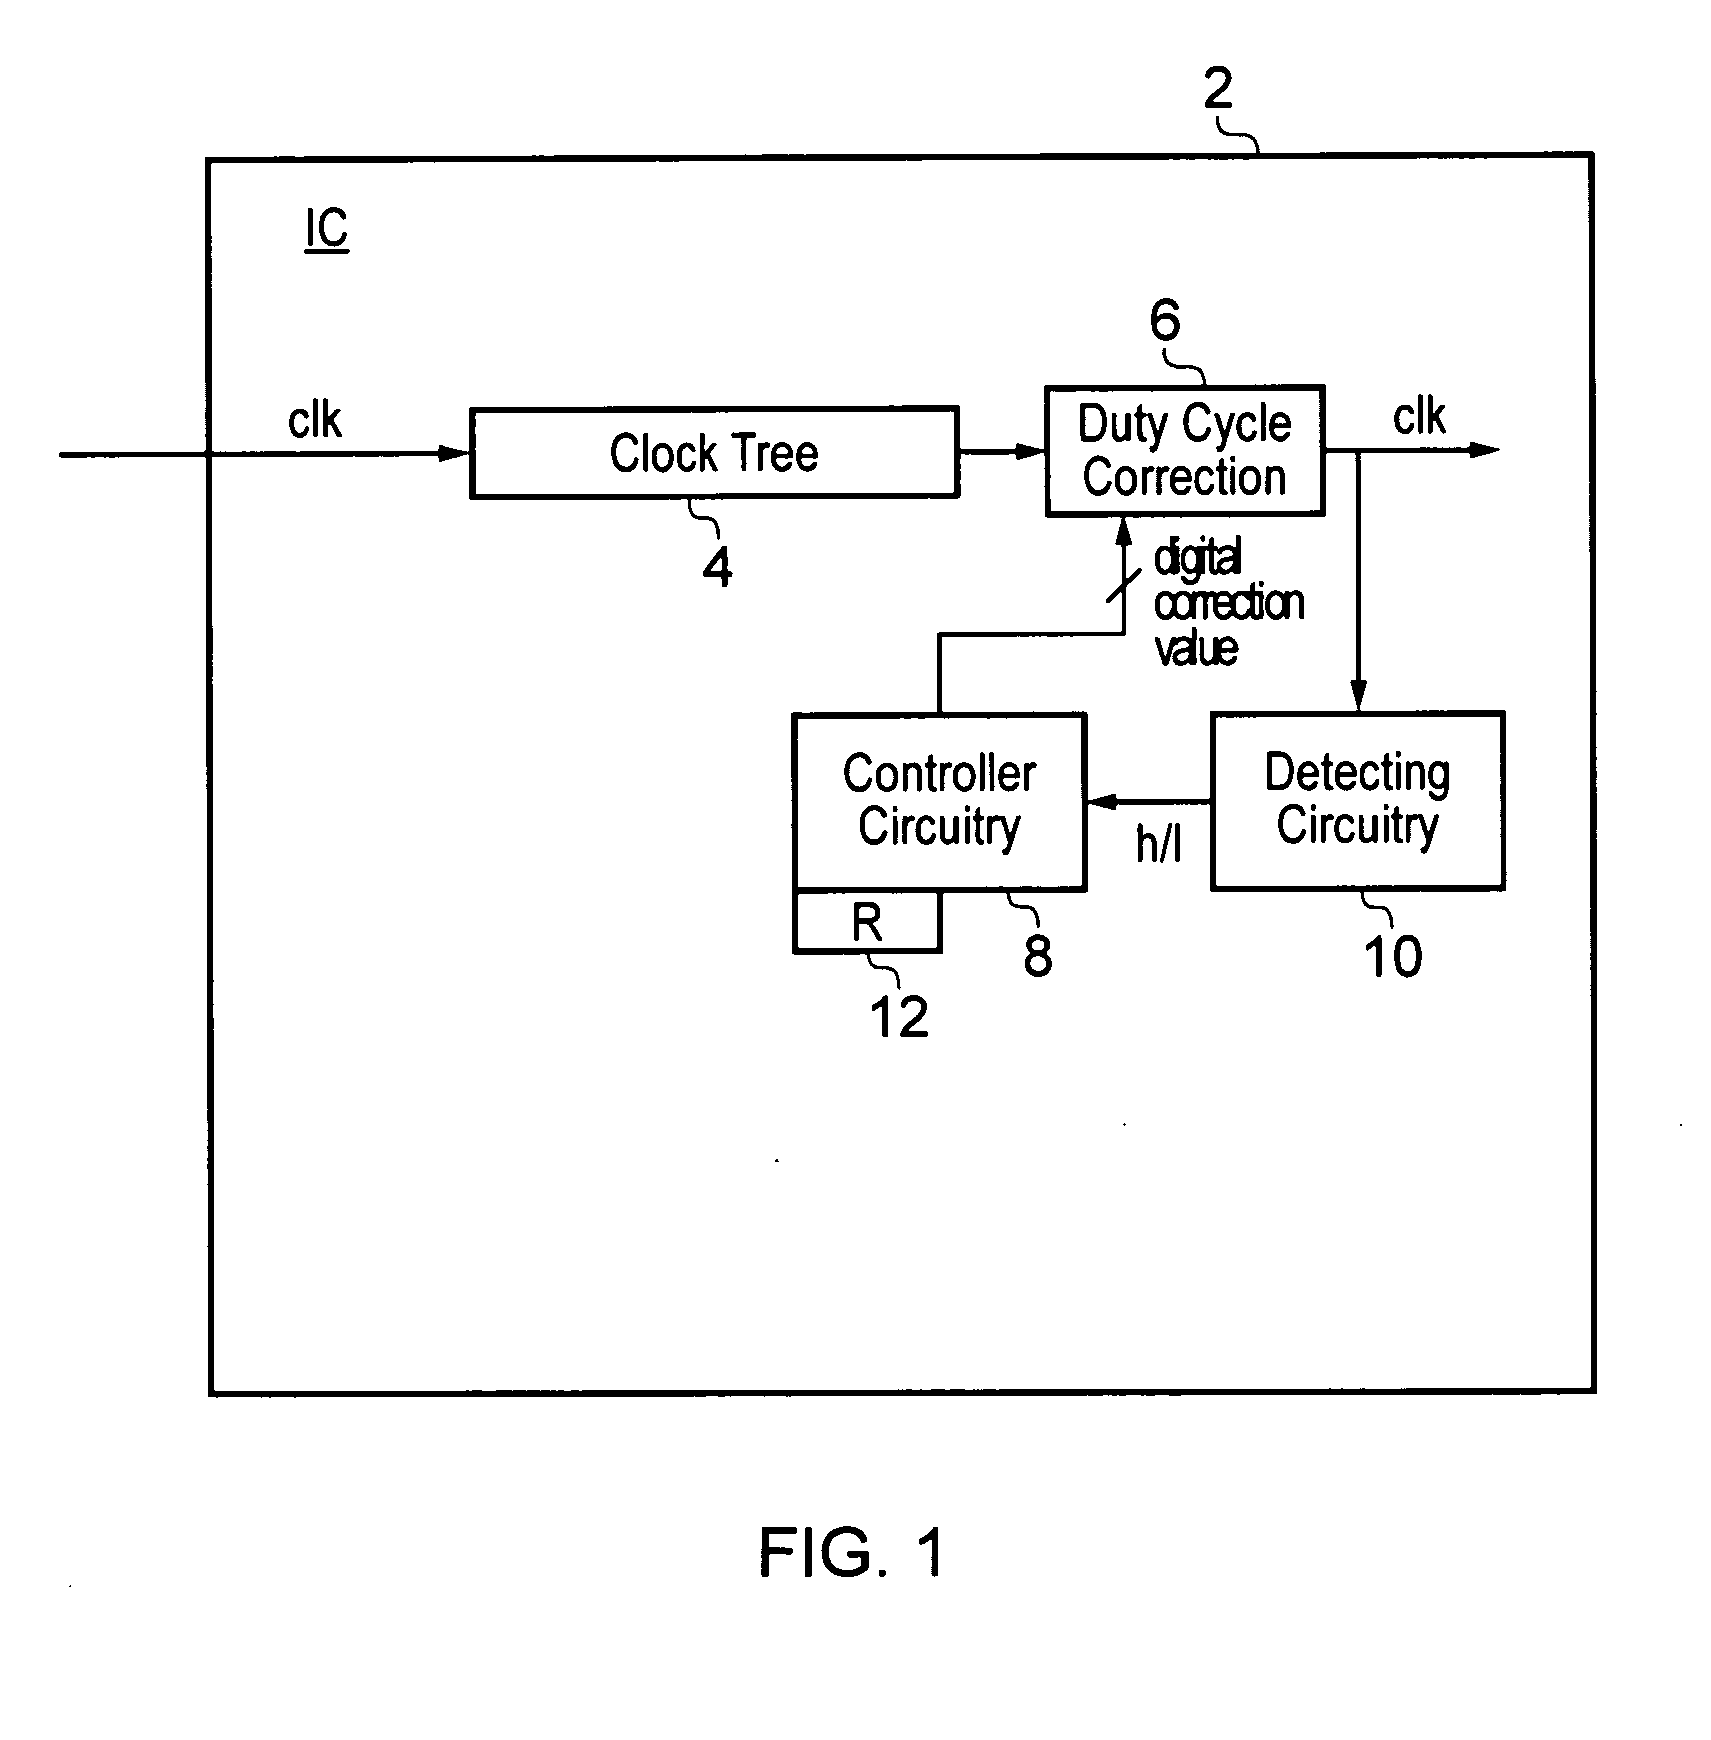 Duty cycle correction within an integrated circuit